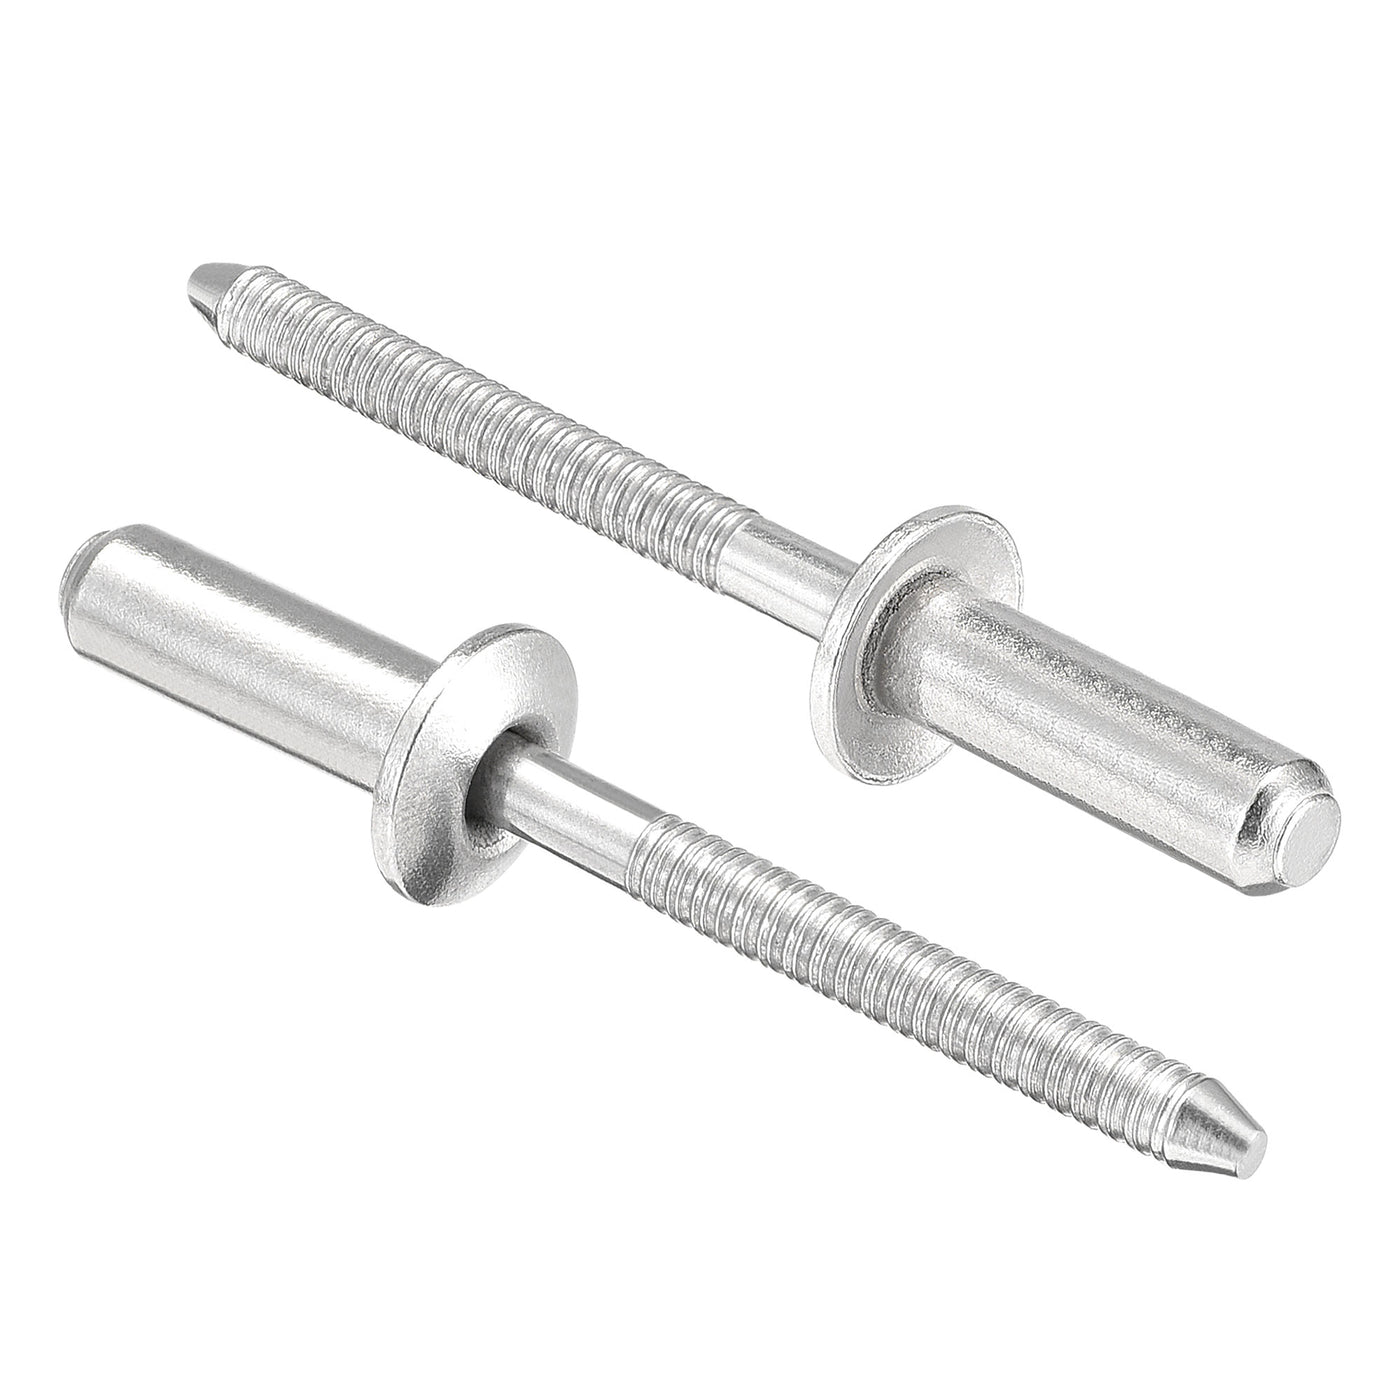 uxcell Uxcell Blind Rivets 304 Stainless Steel 4.8mm Diameter 16mm Grip Length 25pcs